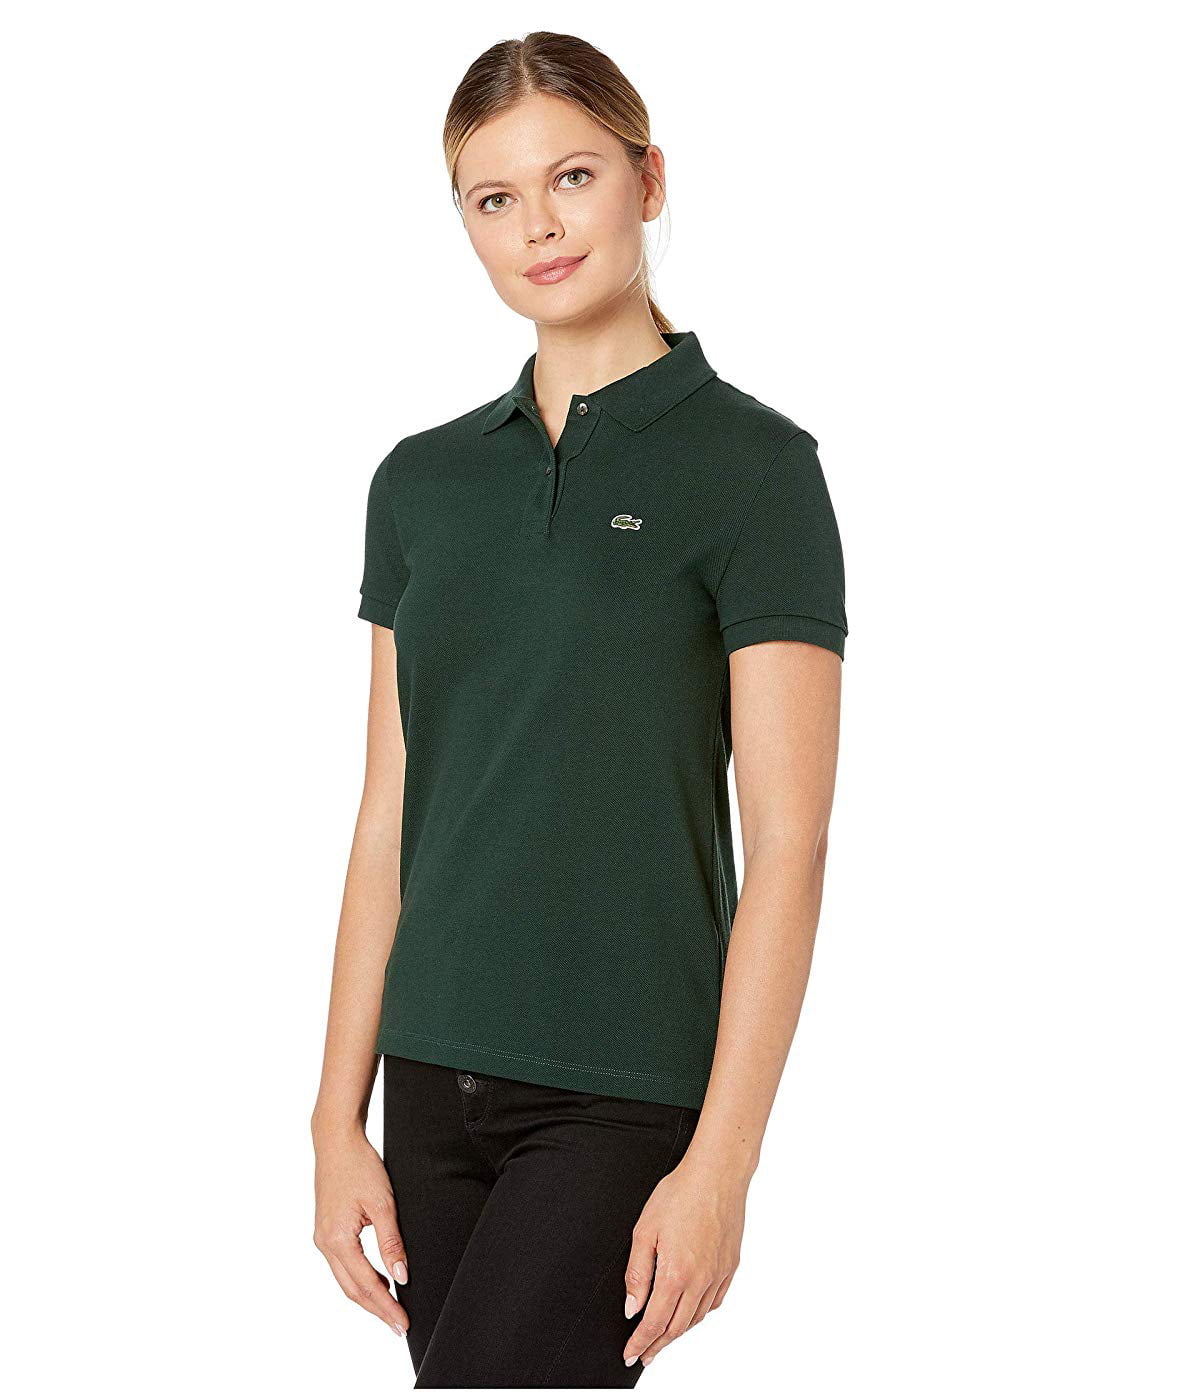 Lacoste Short Sleeve Two-Button Classic Fit Polo Sinople - Walmart.com